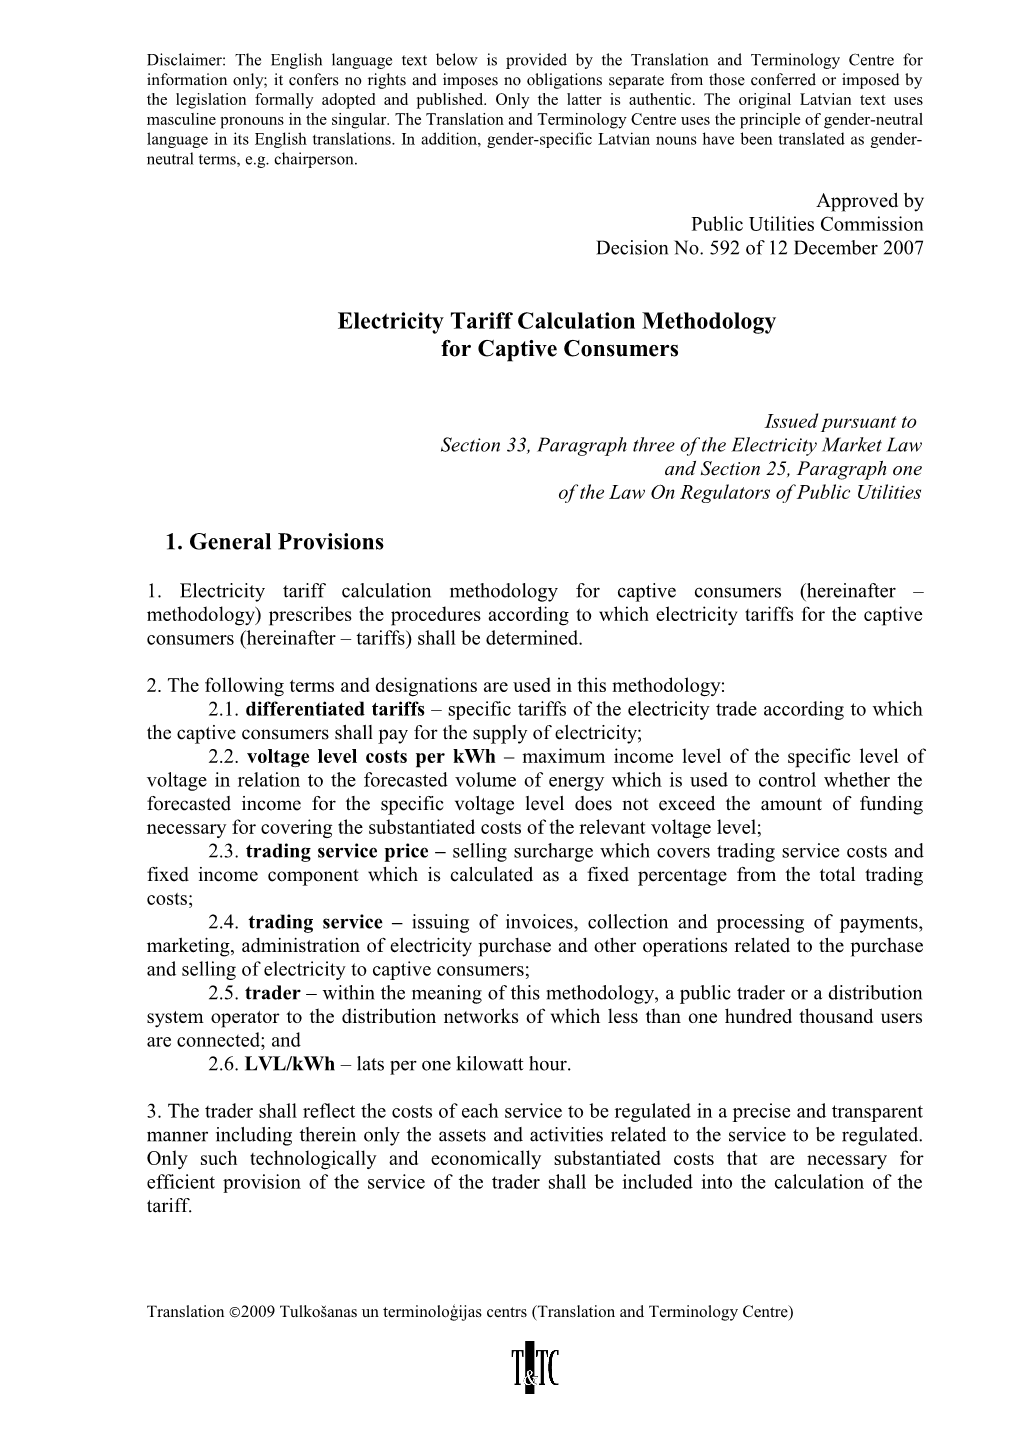 Electricity Tariff Calculation Methodology for Captive Consumers